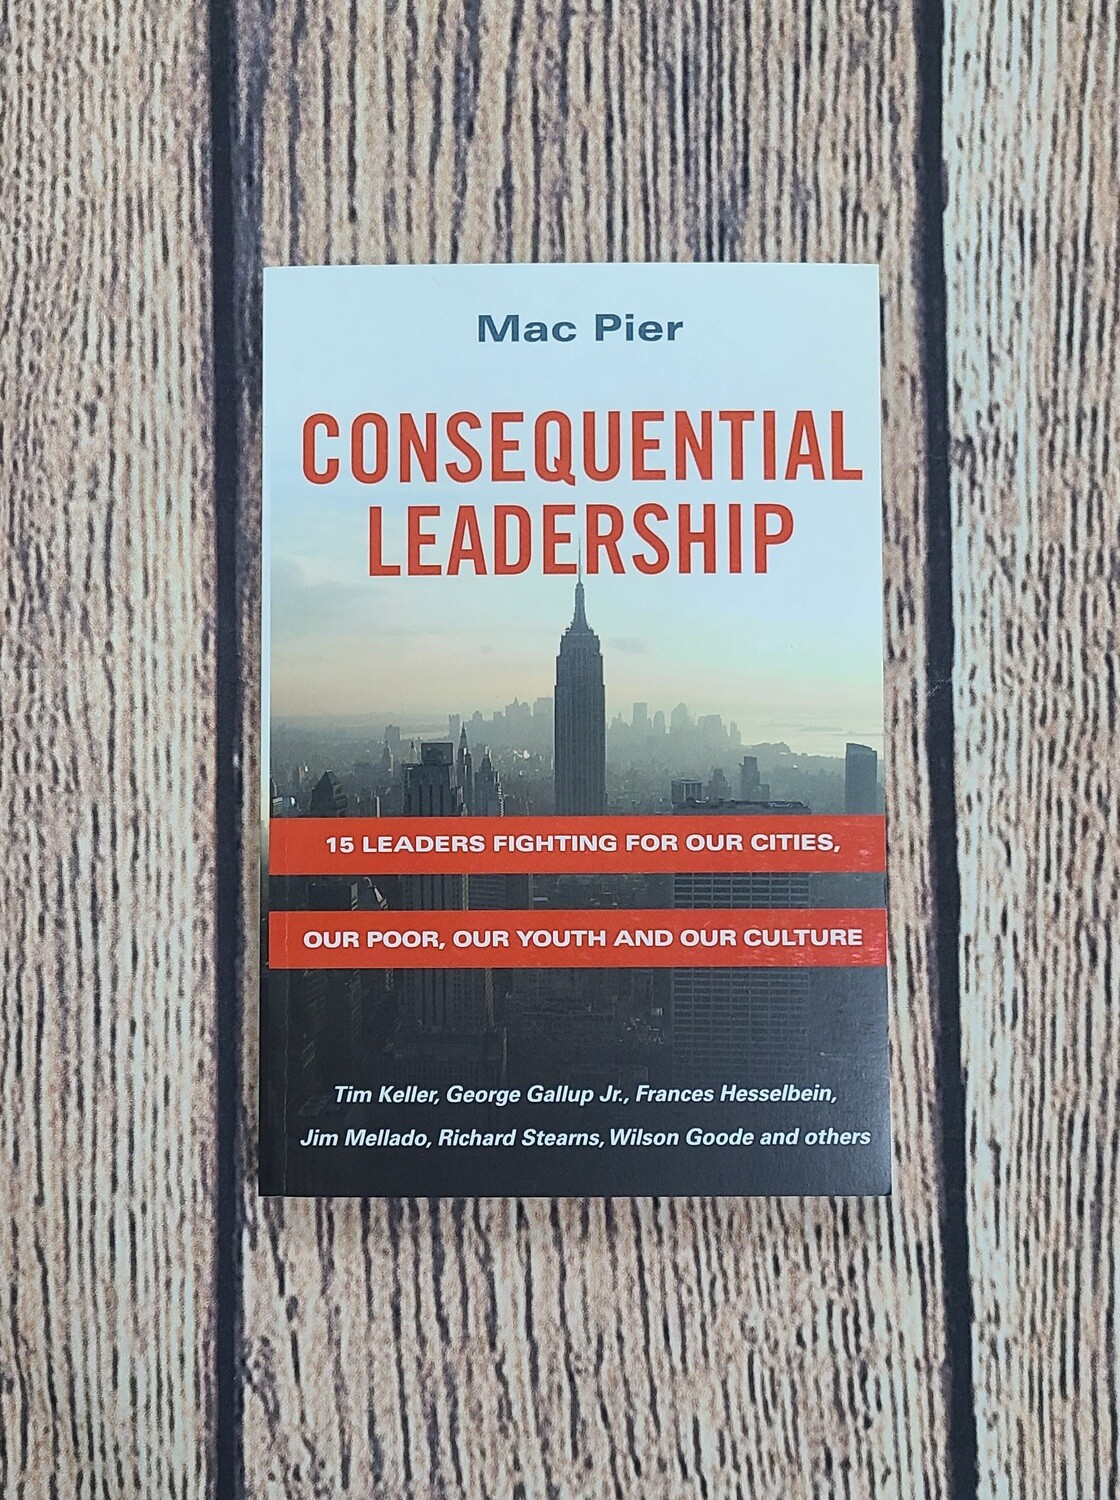 Consequential Leadership by Mac Pier